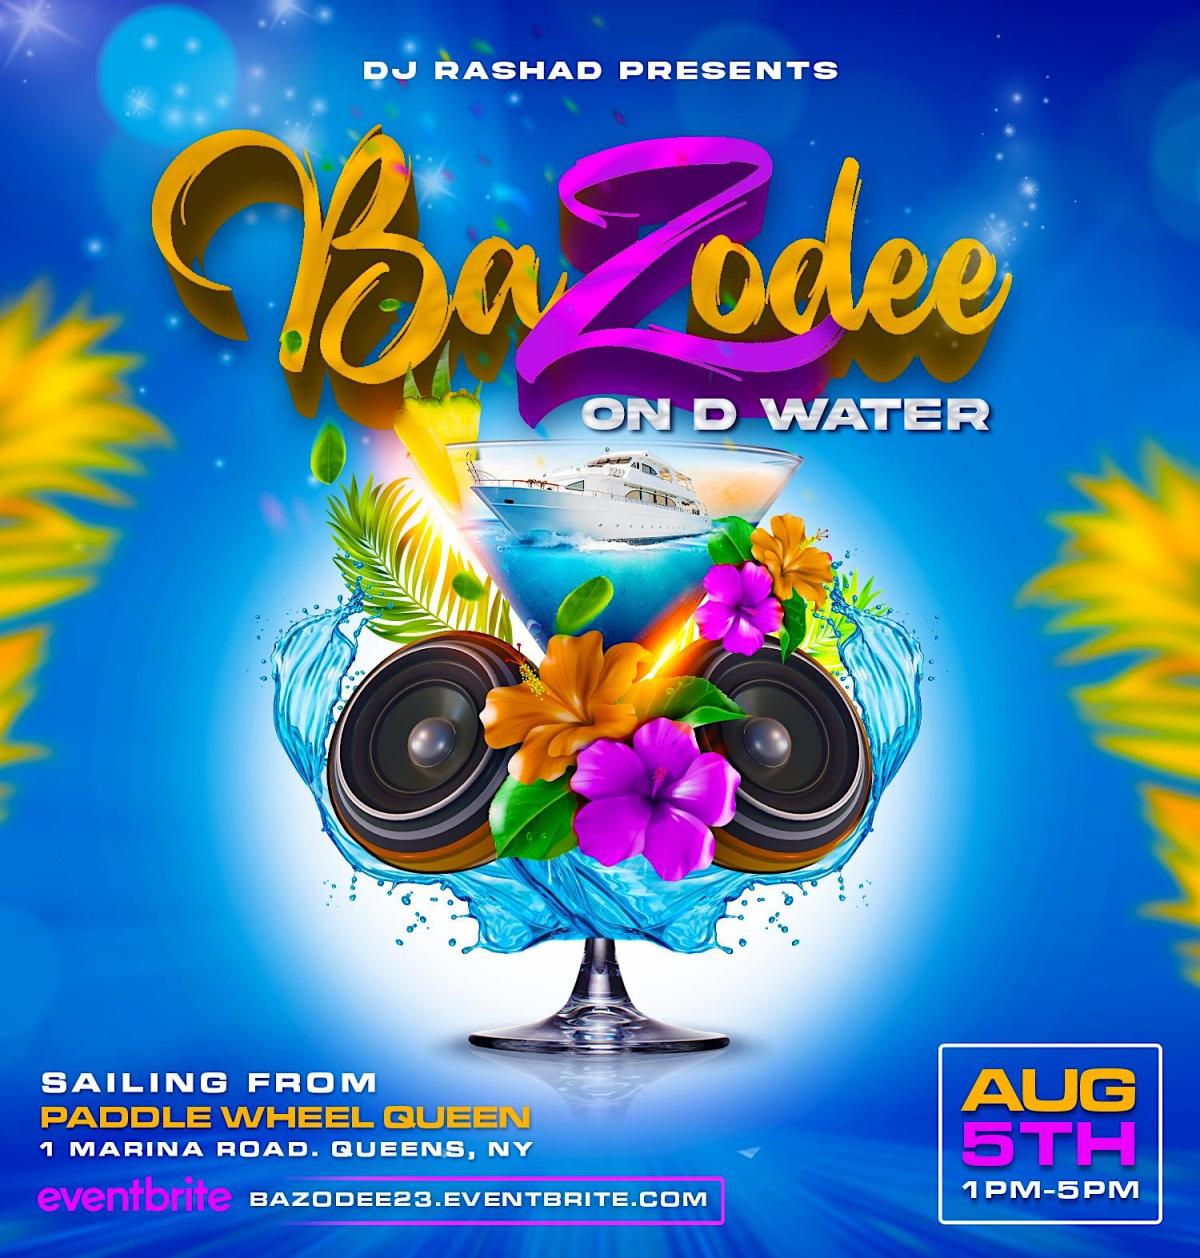 Bazodee  On D Water flyer or graphic.